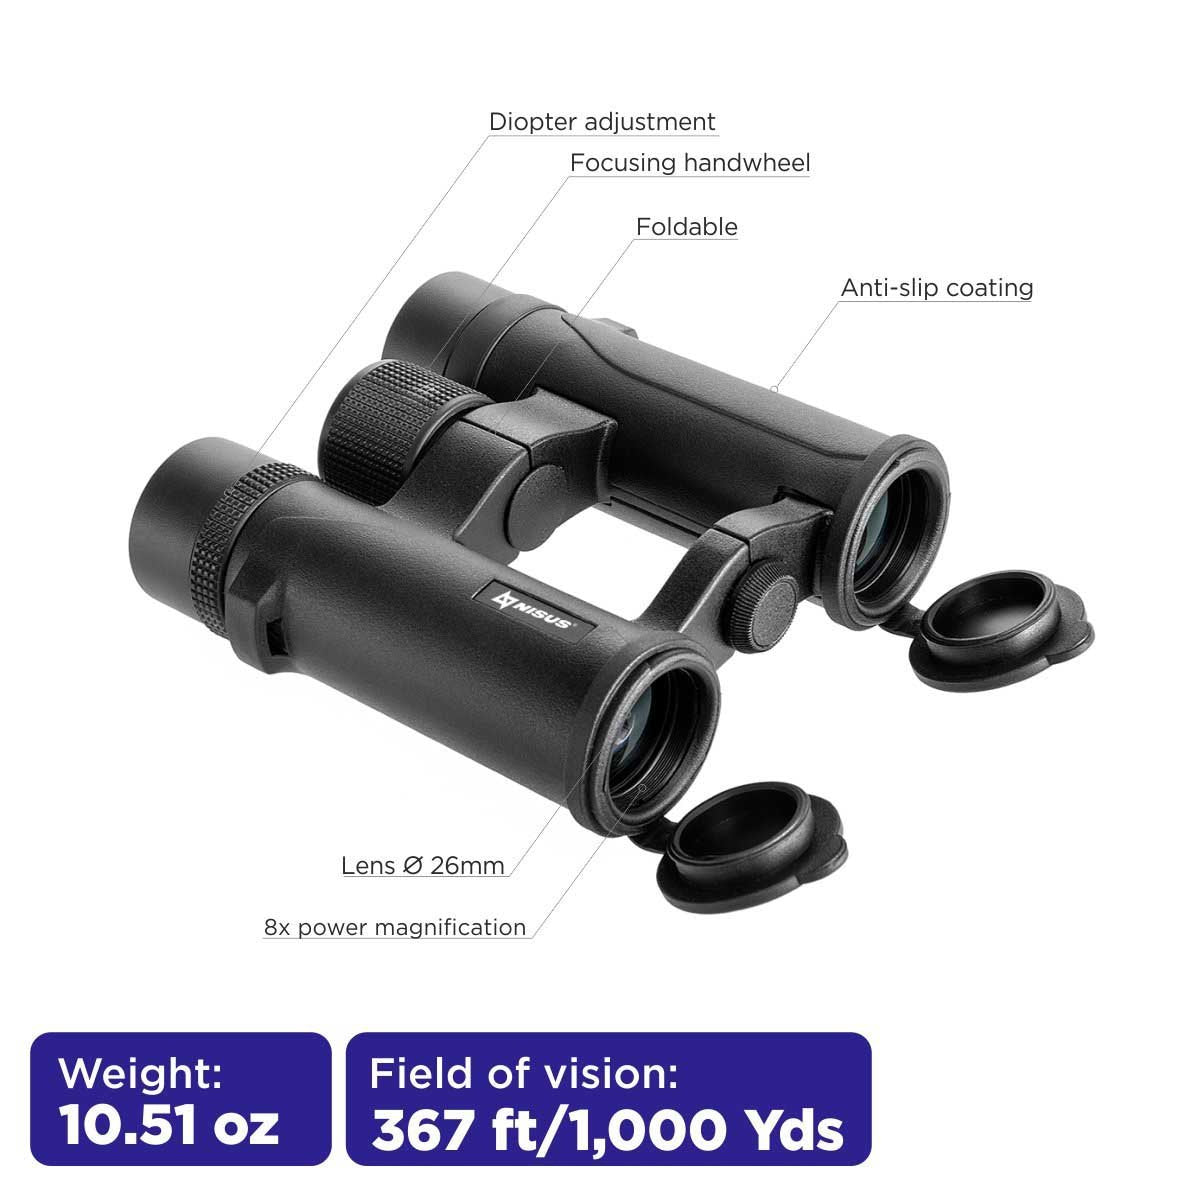 8x26 Compact Folding Binoculars with a Travel Case weighs  10.5 oz, its field of vision stands for 1000 yards. The binocular boasts diopter adjustment, focusing handwheel, anti-slip coating, 26mm lens and 8x magnification